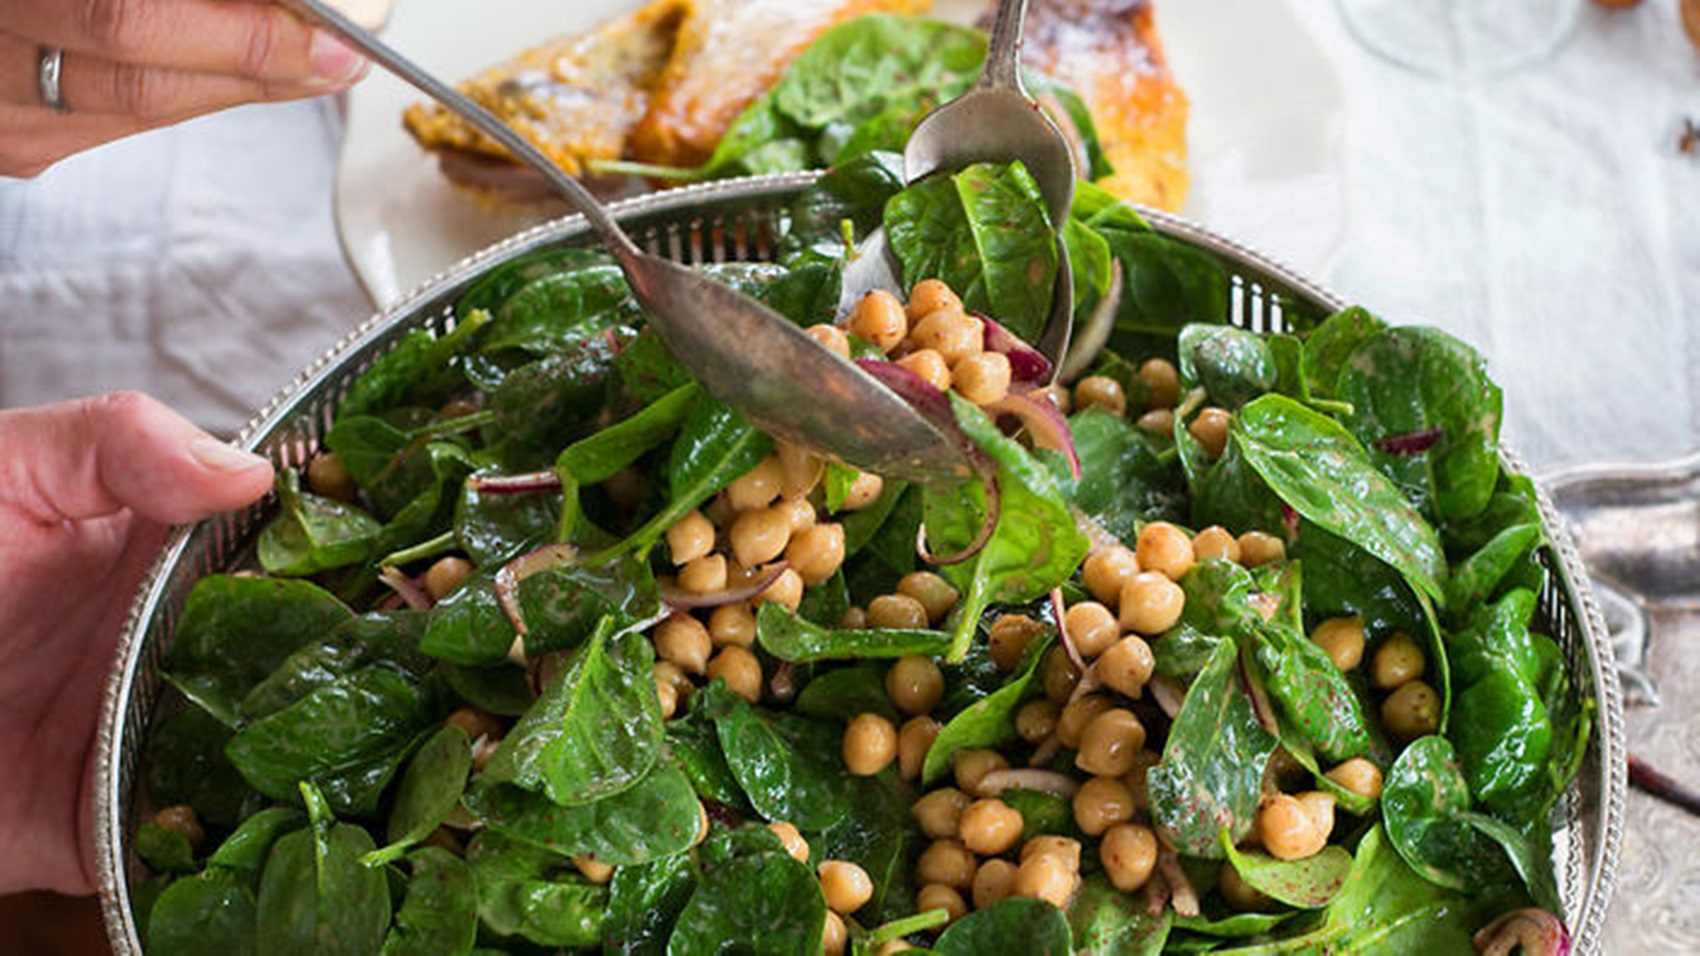 Green salad in bowl with chickpeas